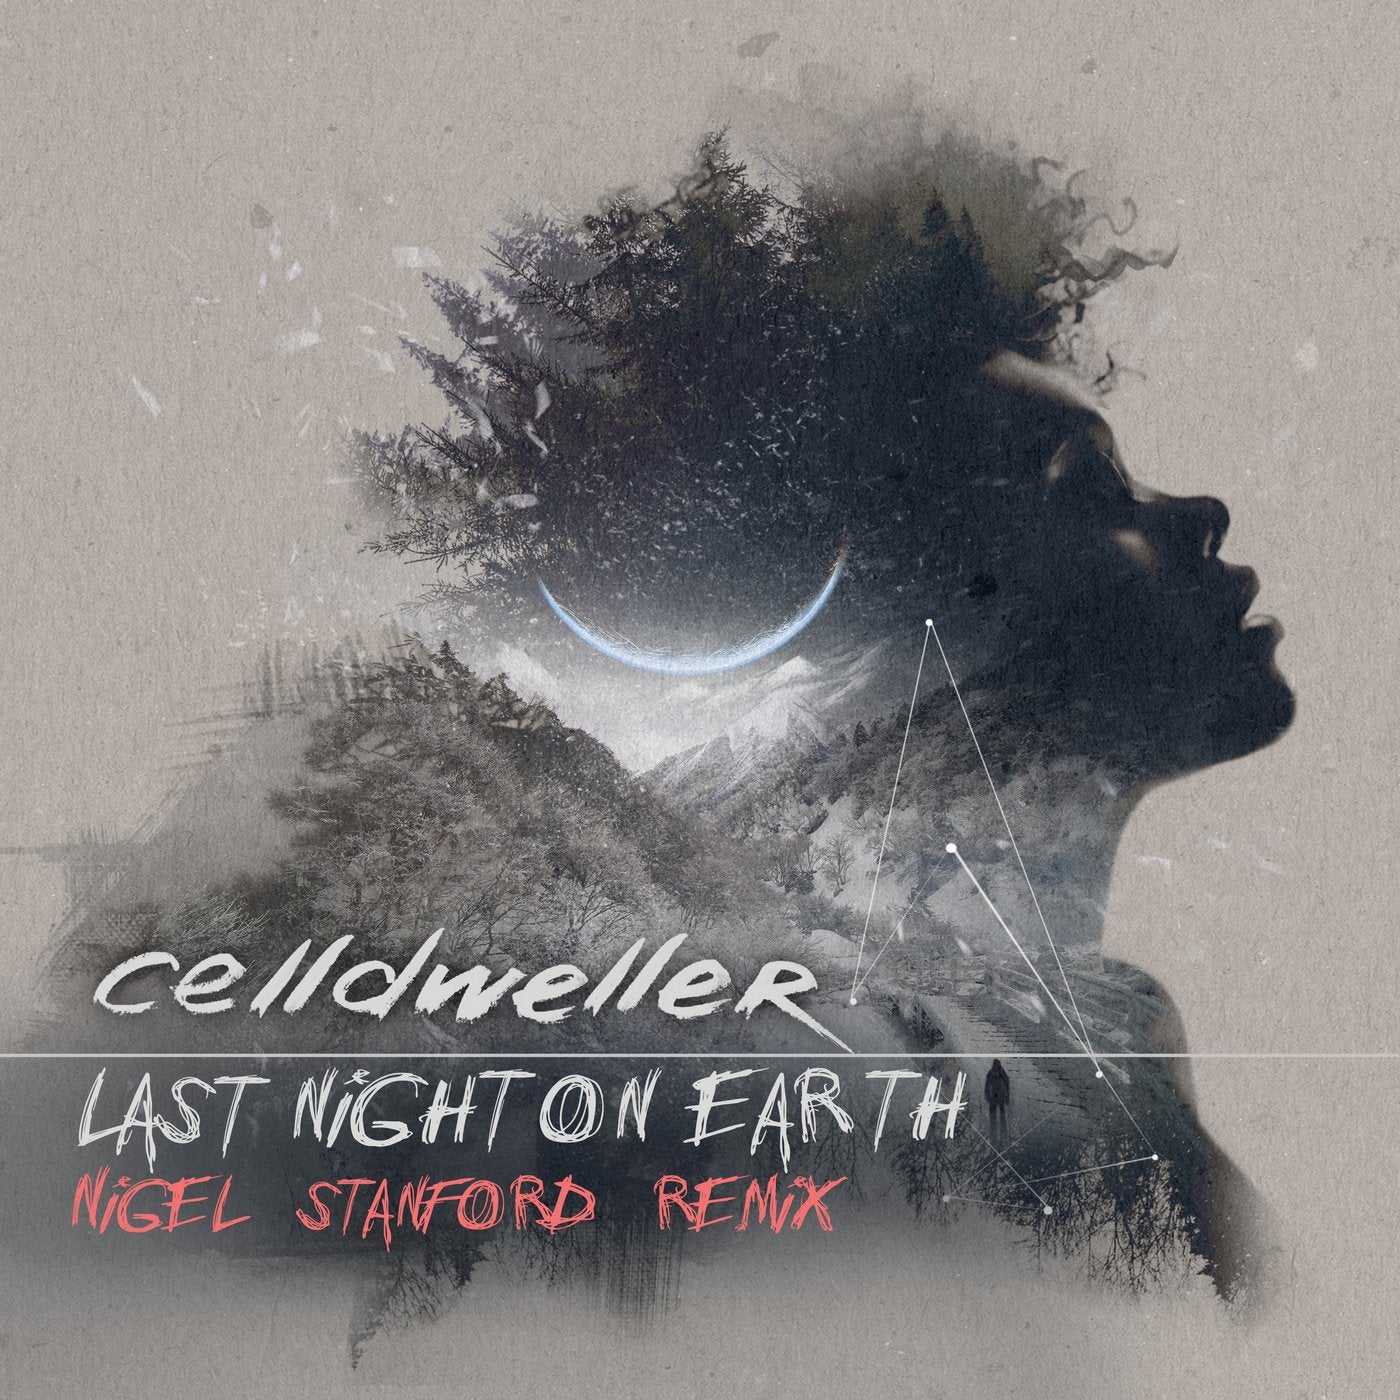 Did you well last night. Last Night on Earth. Nigel Stanford. Celldweller. Last Night on Earth Remastered.